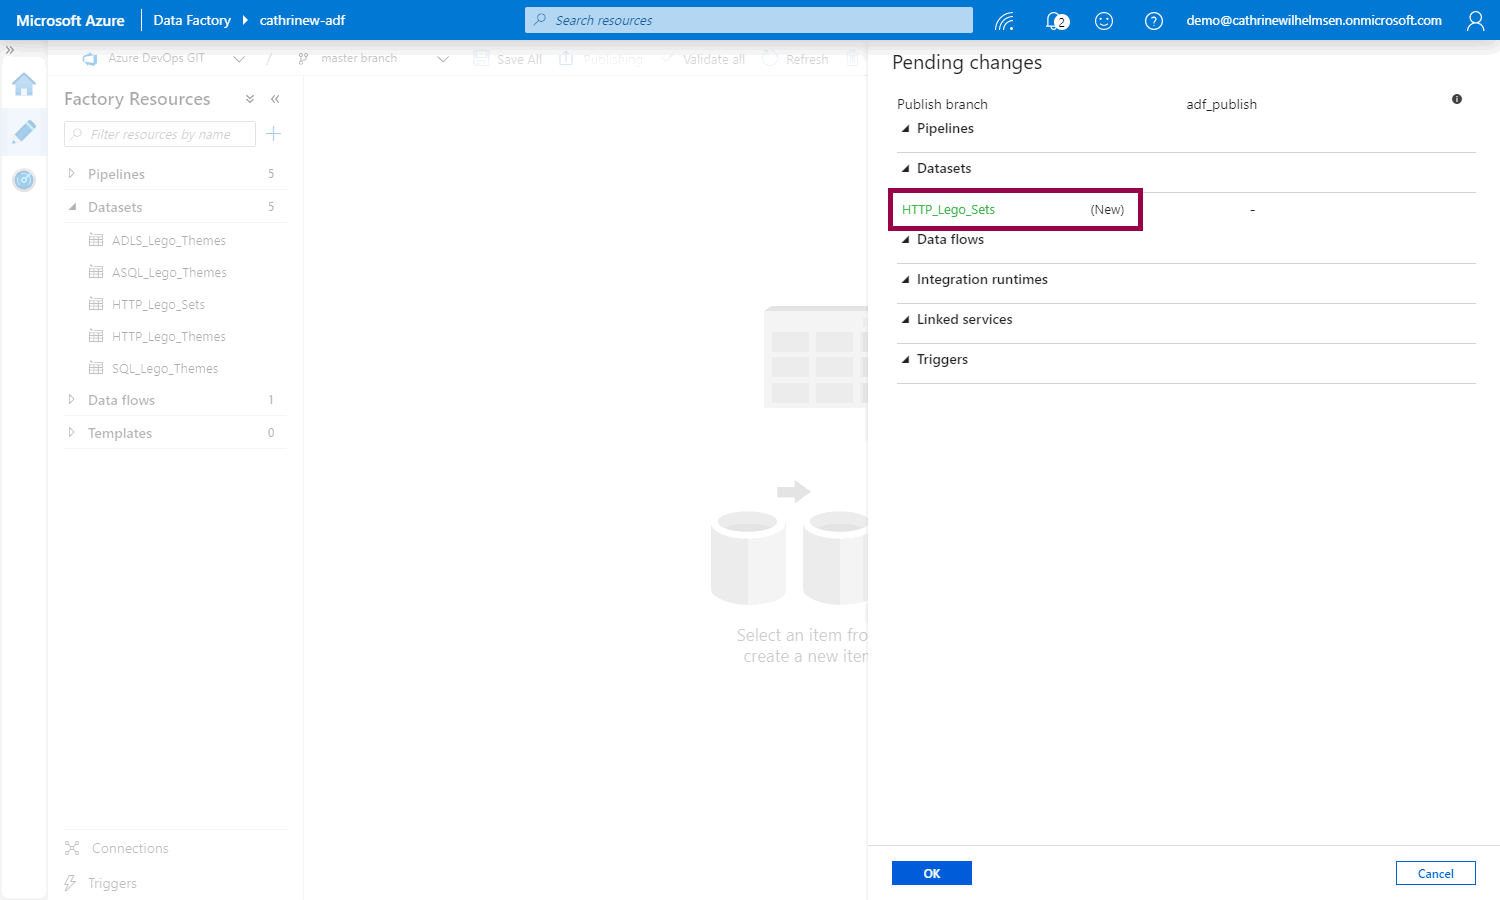 Screenshot of the pending changes pane in Azure Data Factory